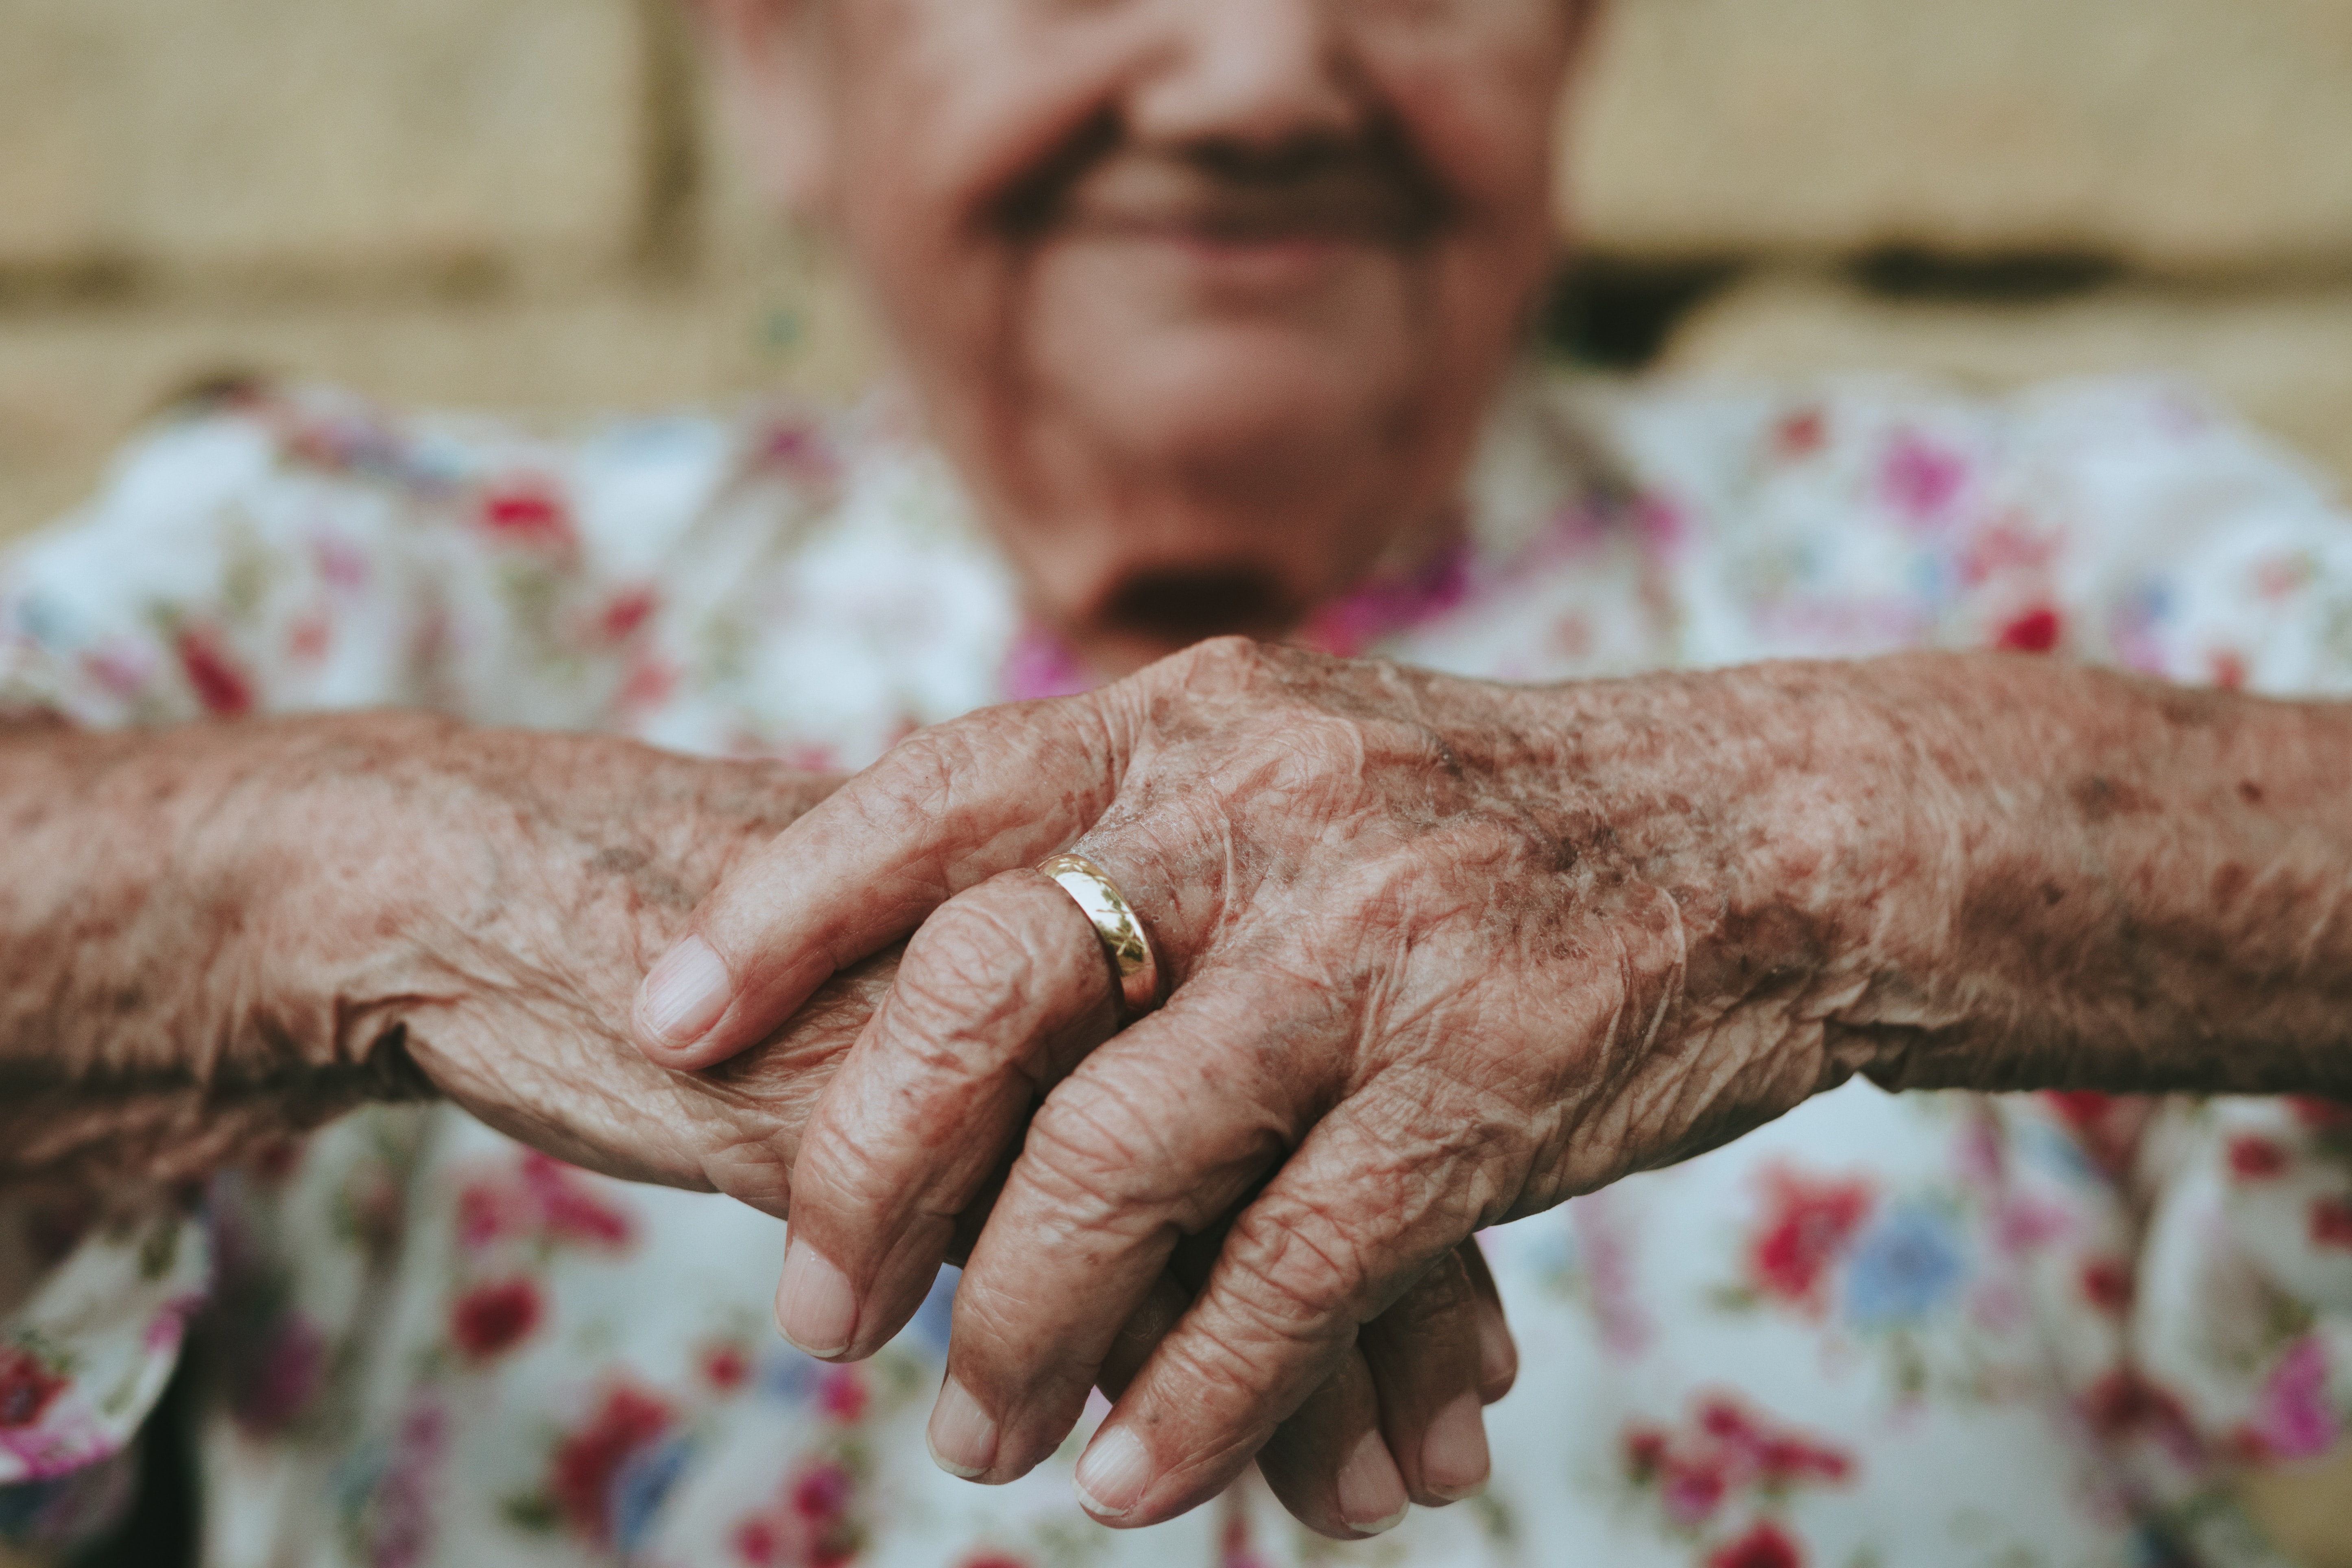 Thantophobia's varied impact: Elderly woman's hands symbolize the fear of losing someone you love, with effects across age groups.